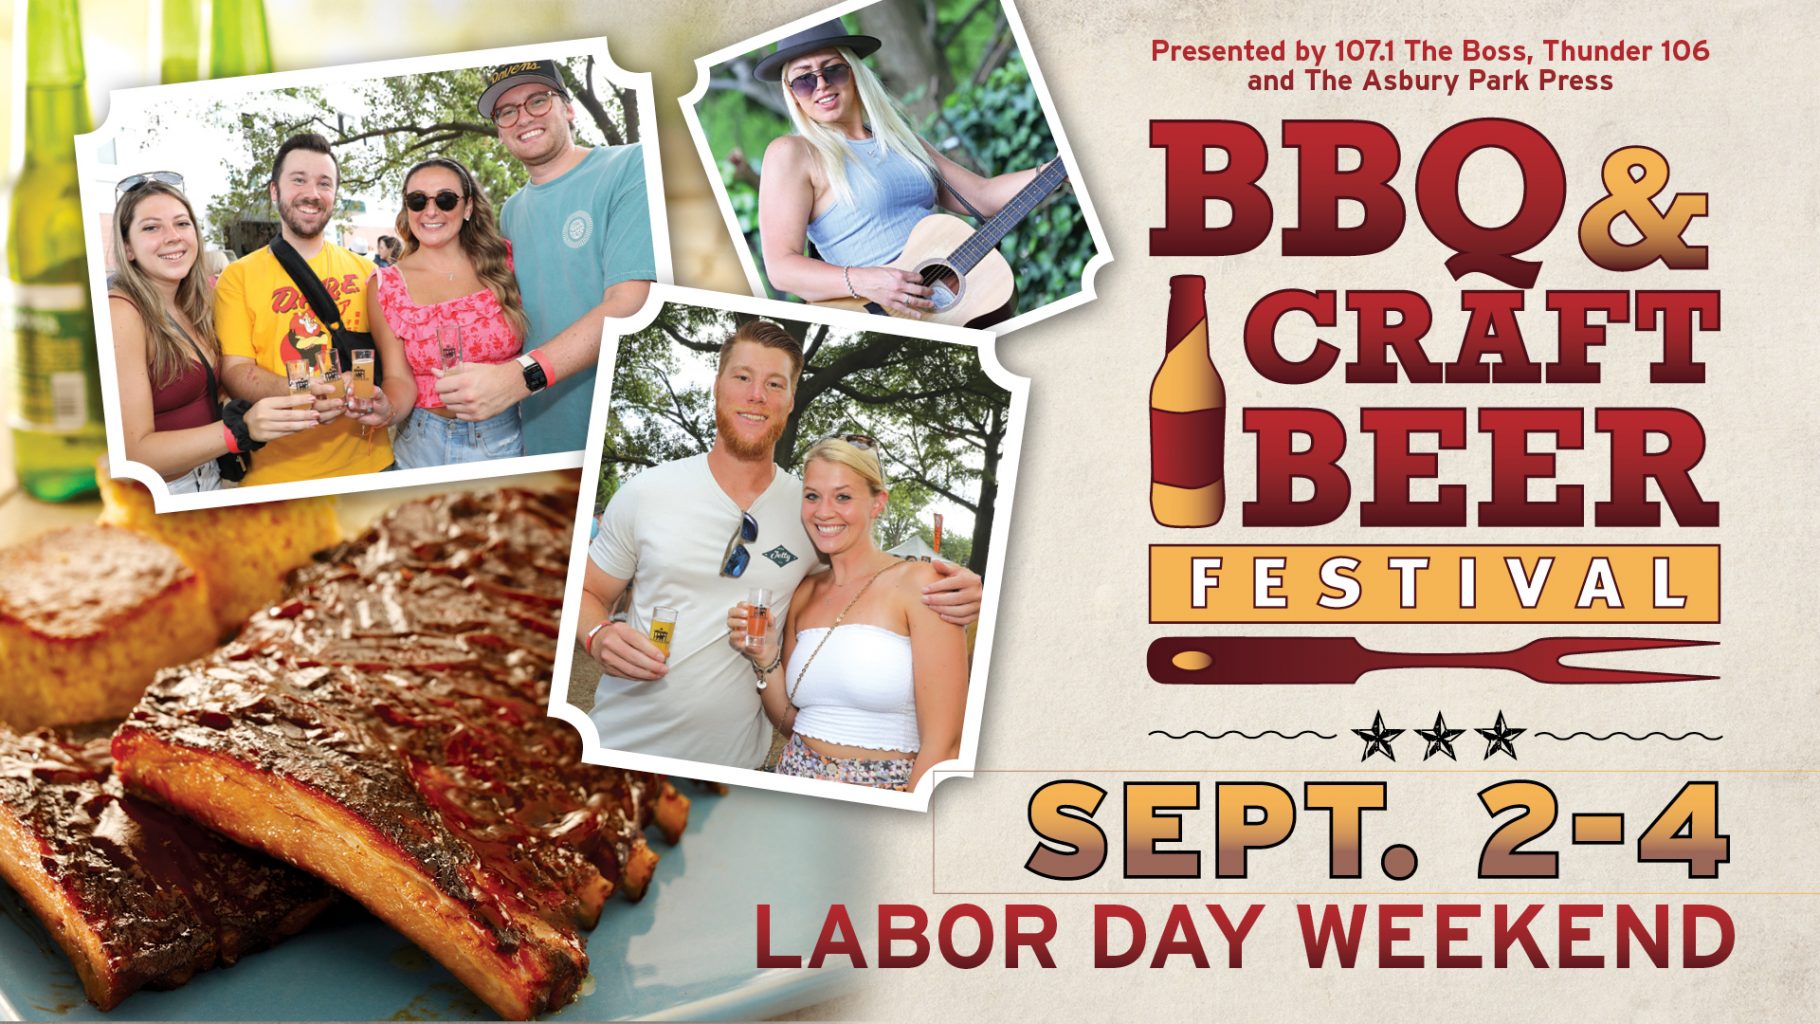 Three-Day BBQ & New Jersey Craft Beer Festival On Tap For Labor Day Weekend  at Monmouth Park Starting Saturday - Monmouth Park